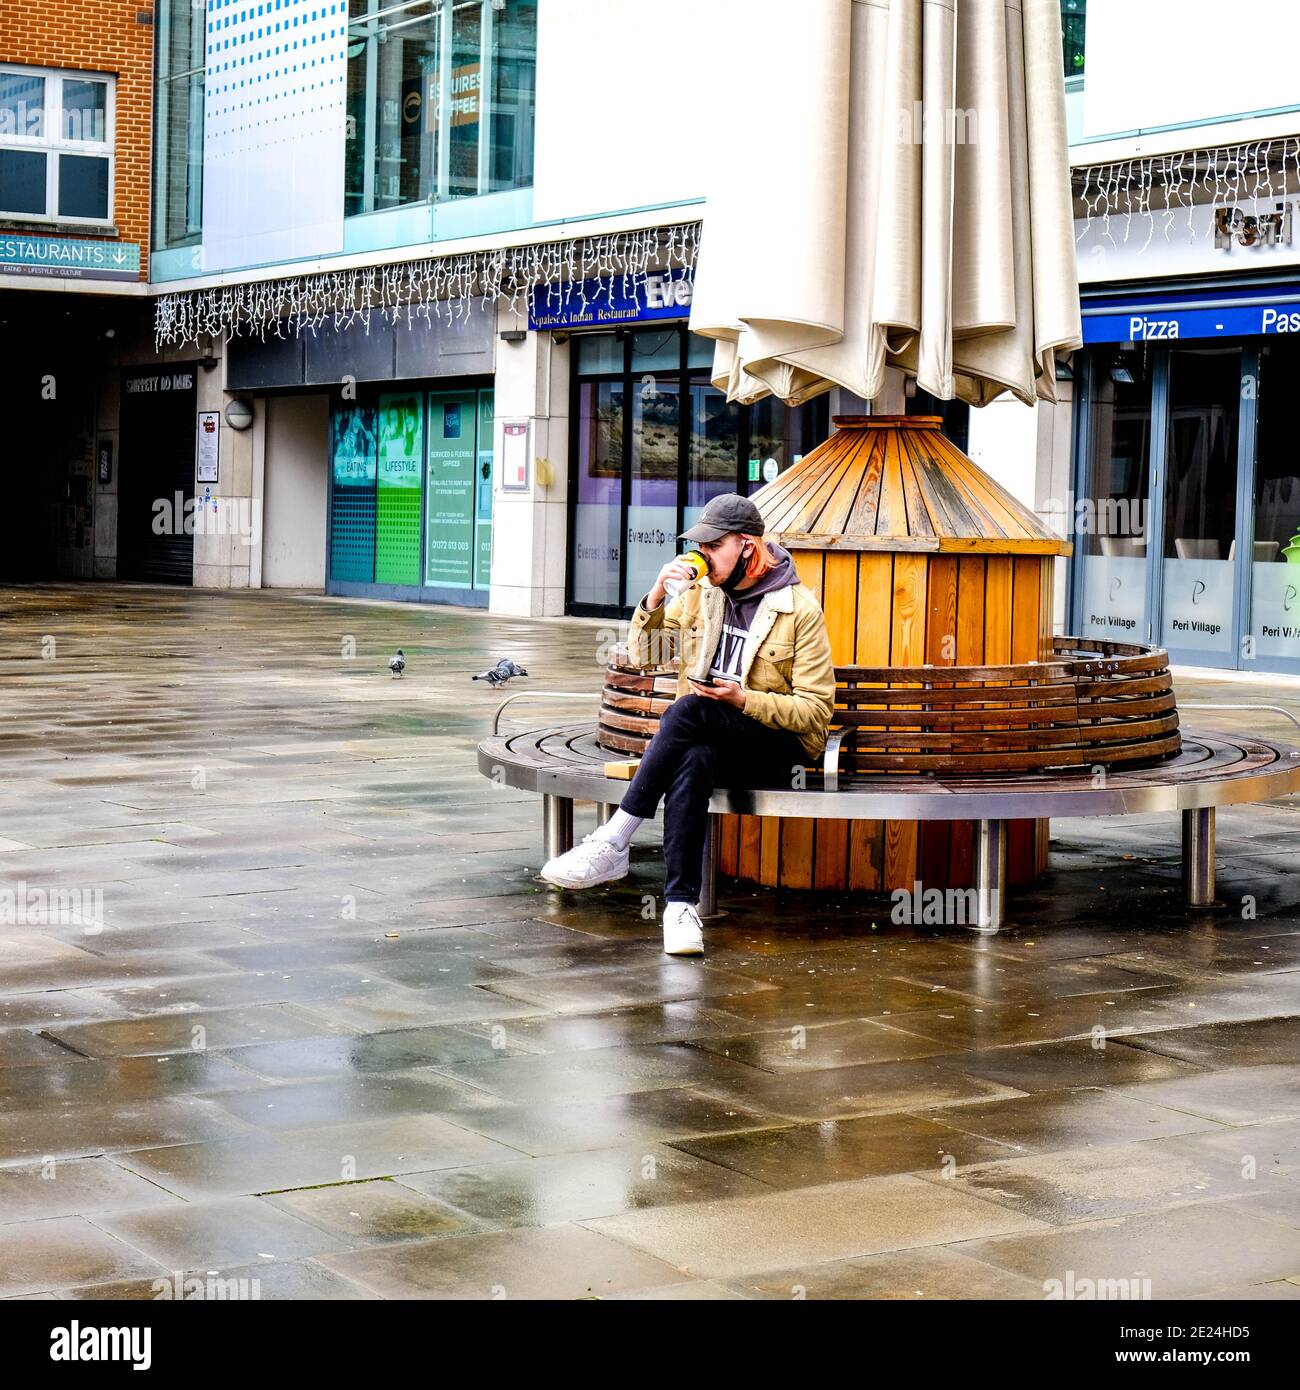 London UK, January 03 2021, Young Man Sitting Alone On A Round Wooden Bench Drinking Takeaway Coffee During Covid-19 Pandemic Lockdown Stock Photo